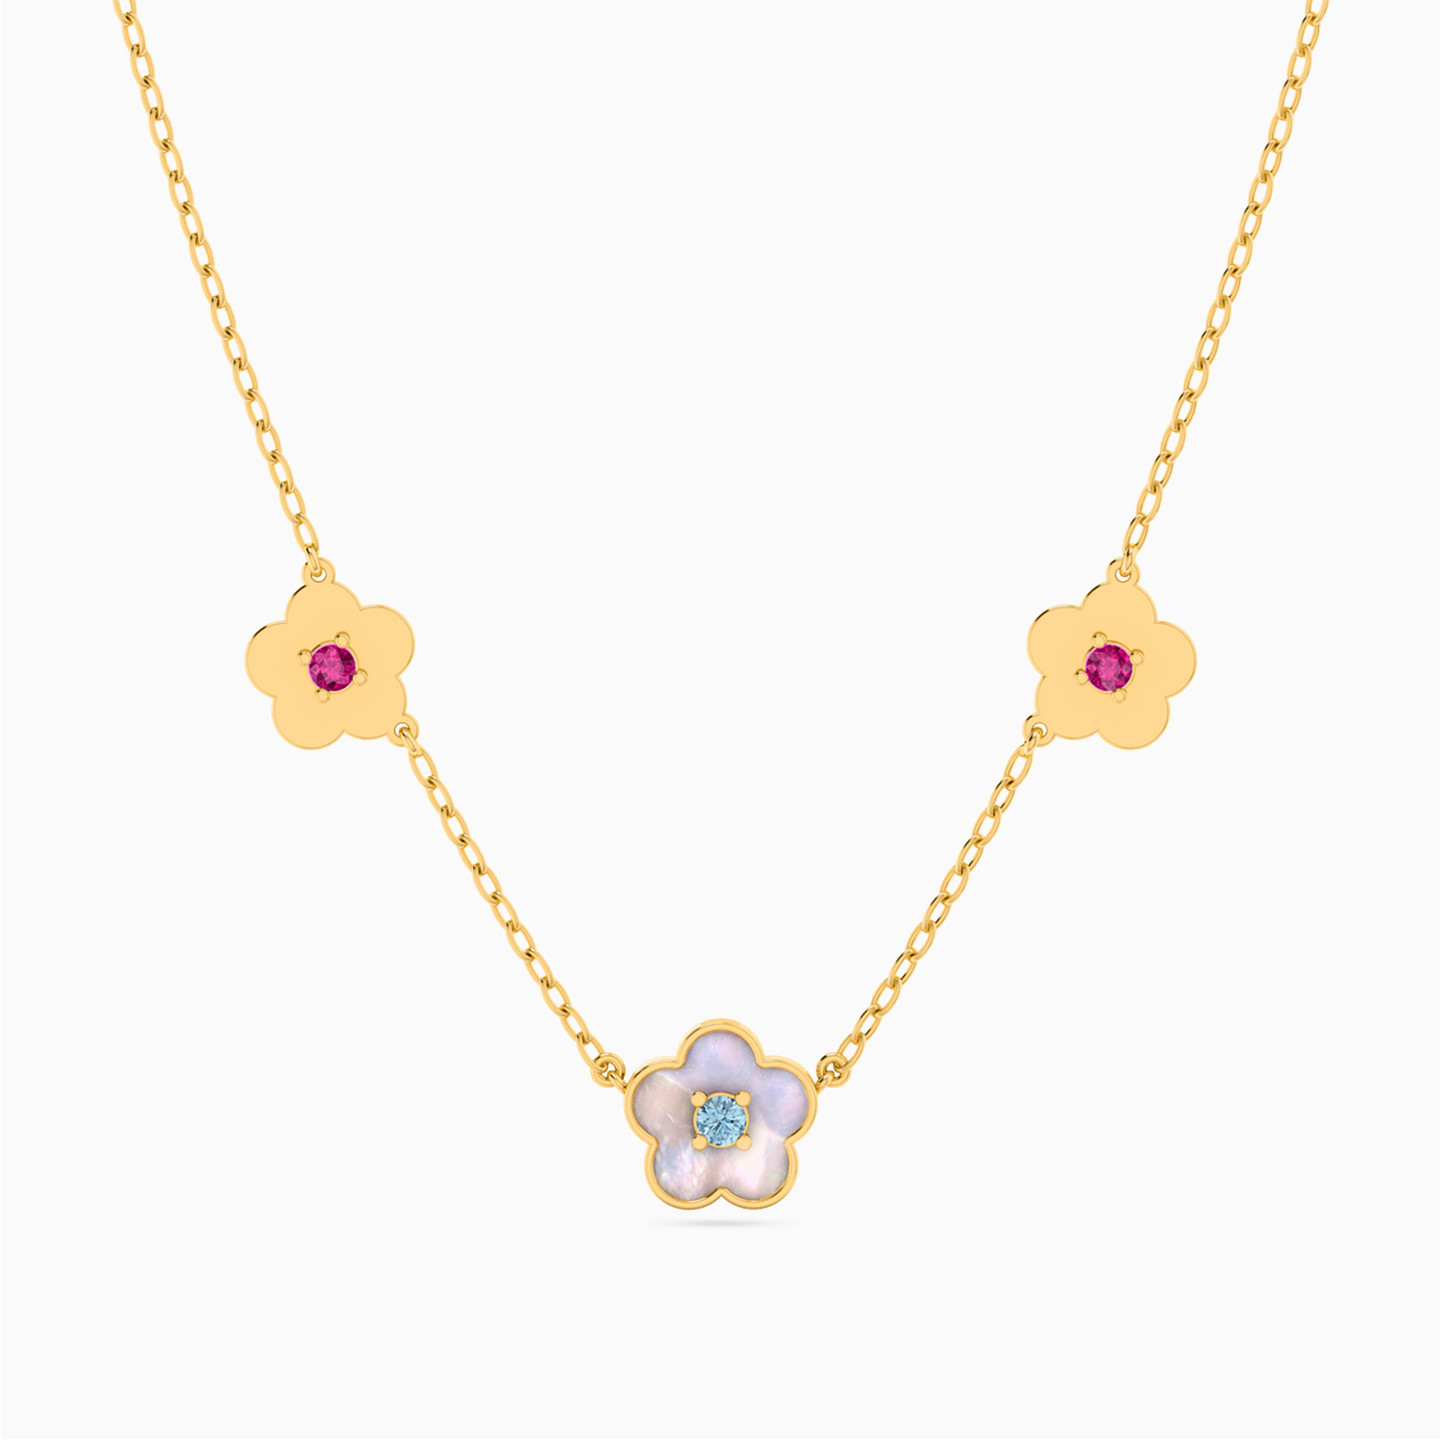 18K Gold Colored Stones Chain Necklace